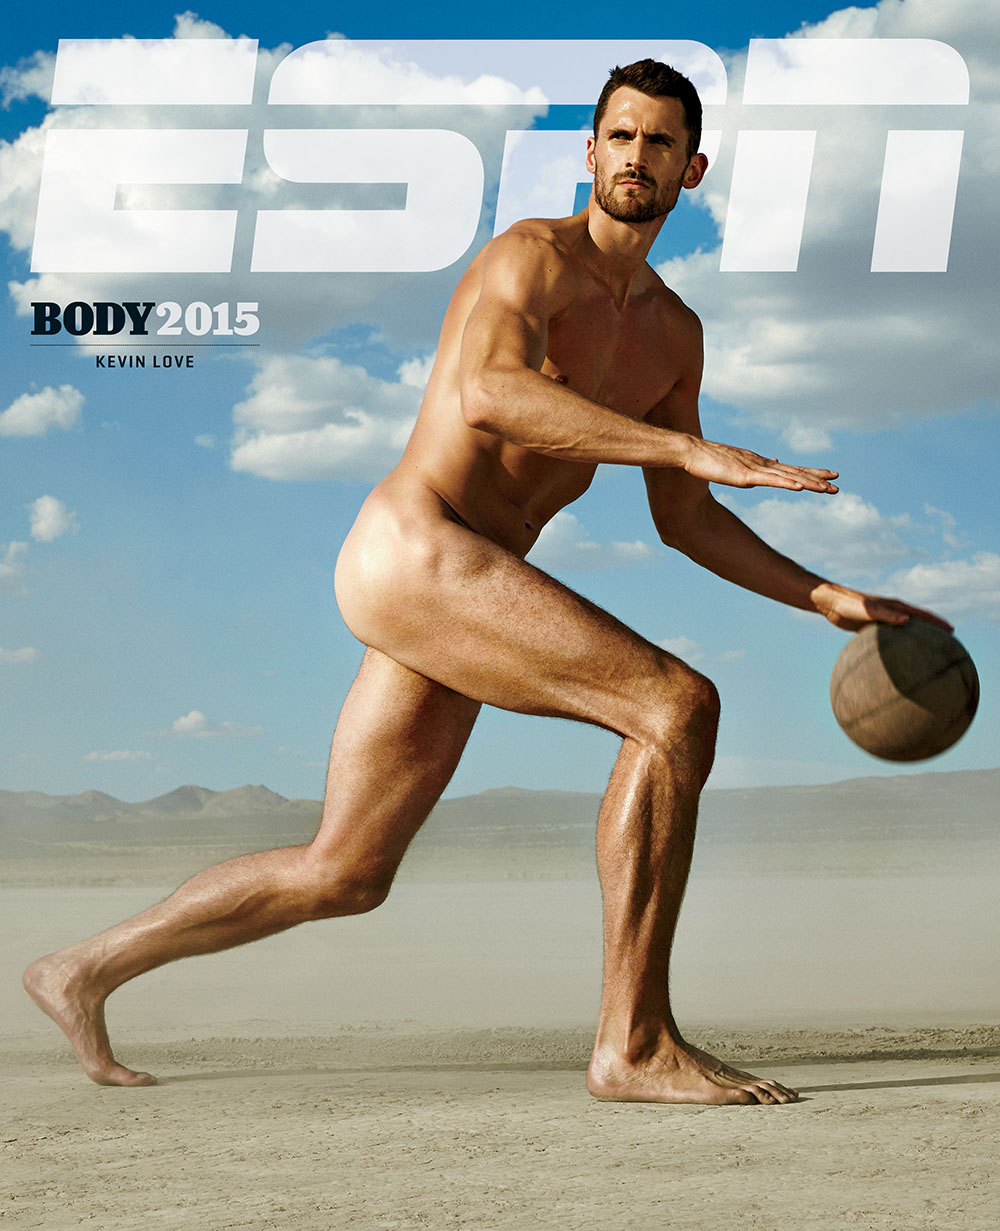 Photography News - Stunning sporty nudes by ESPN Kevin Love photographed by Richard Phibbs